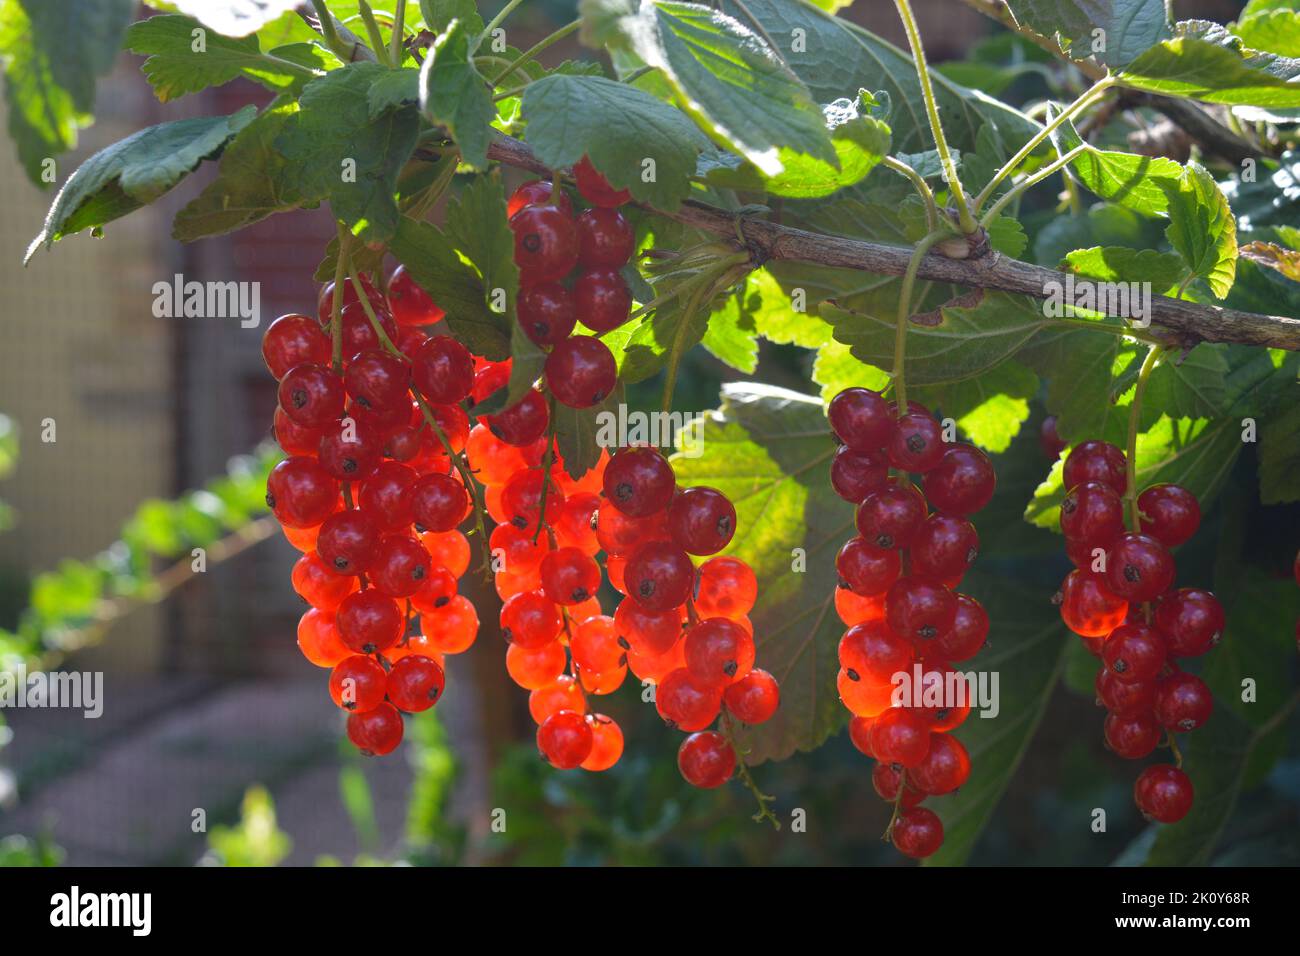 Redcurrants also known as Ribes rubrum,  ripe berries on the bush, ready for harvest in summer Stock Photo